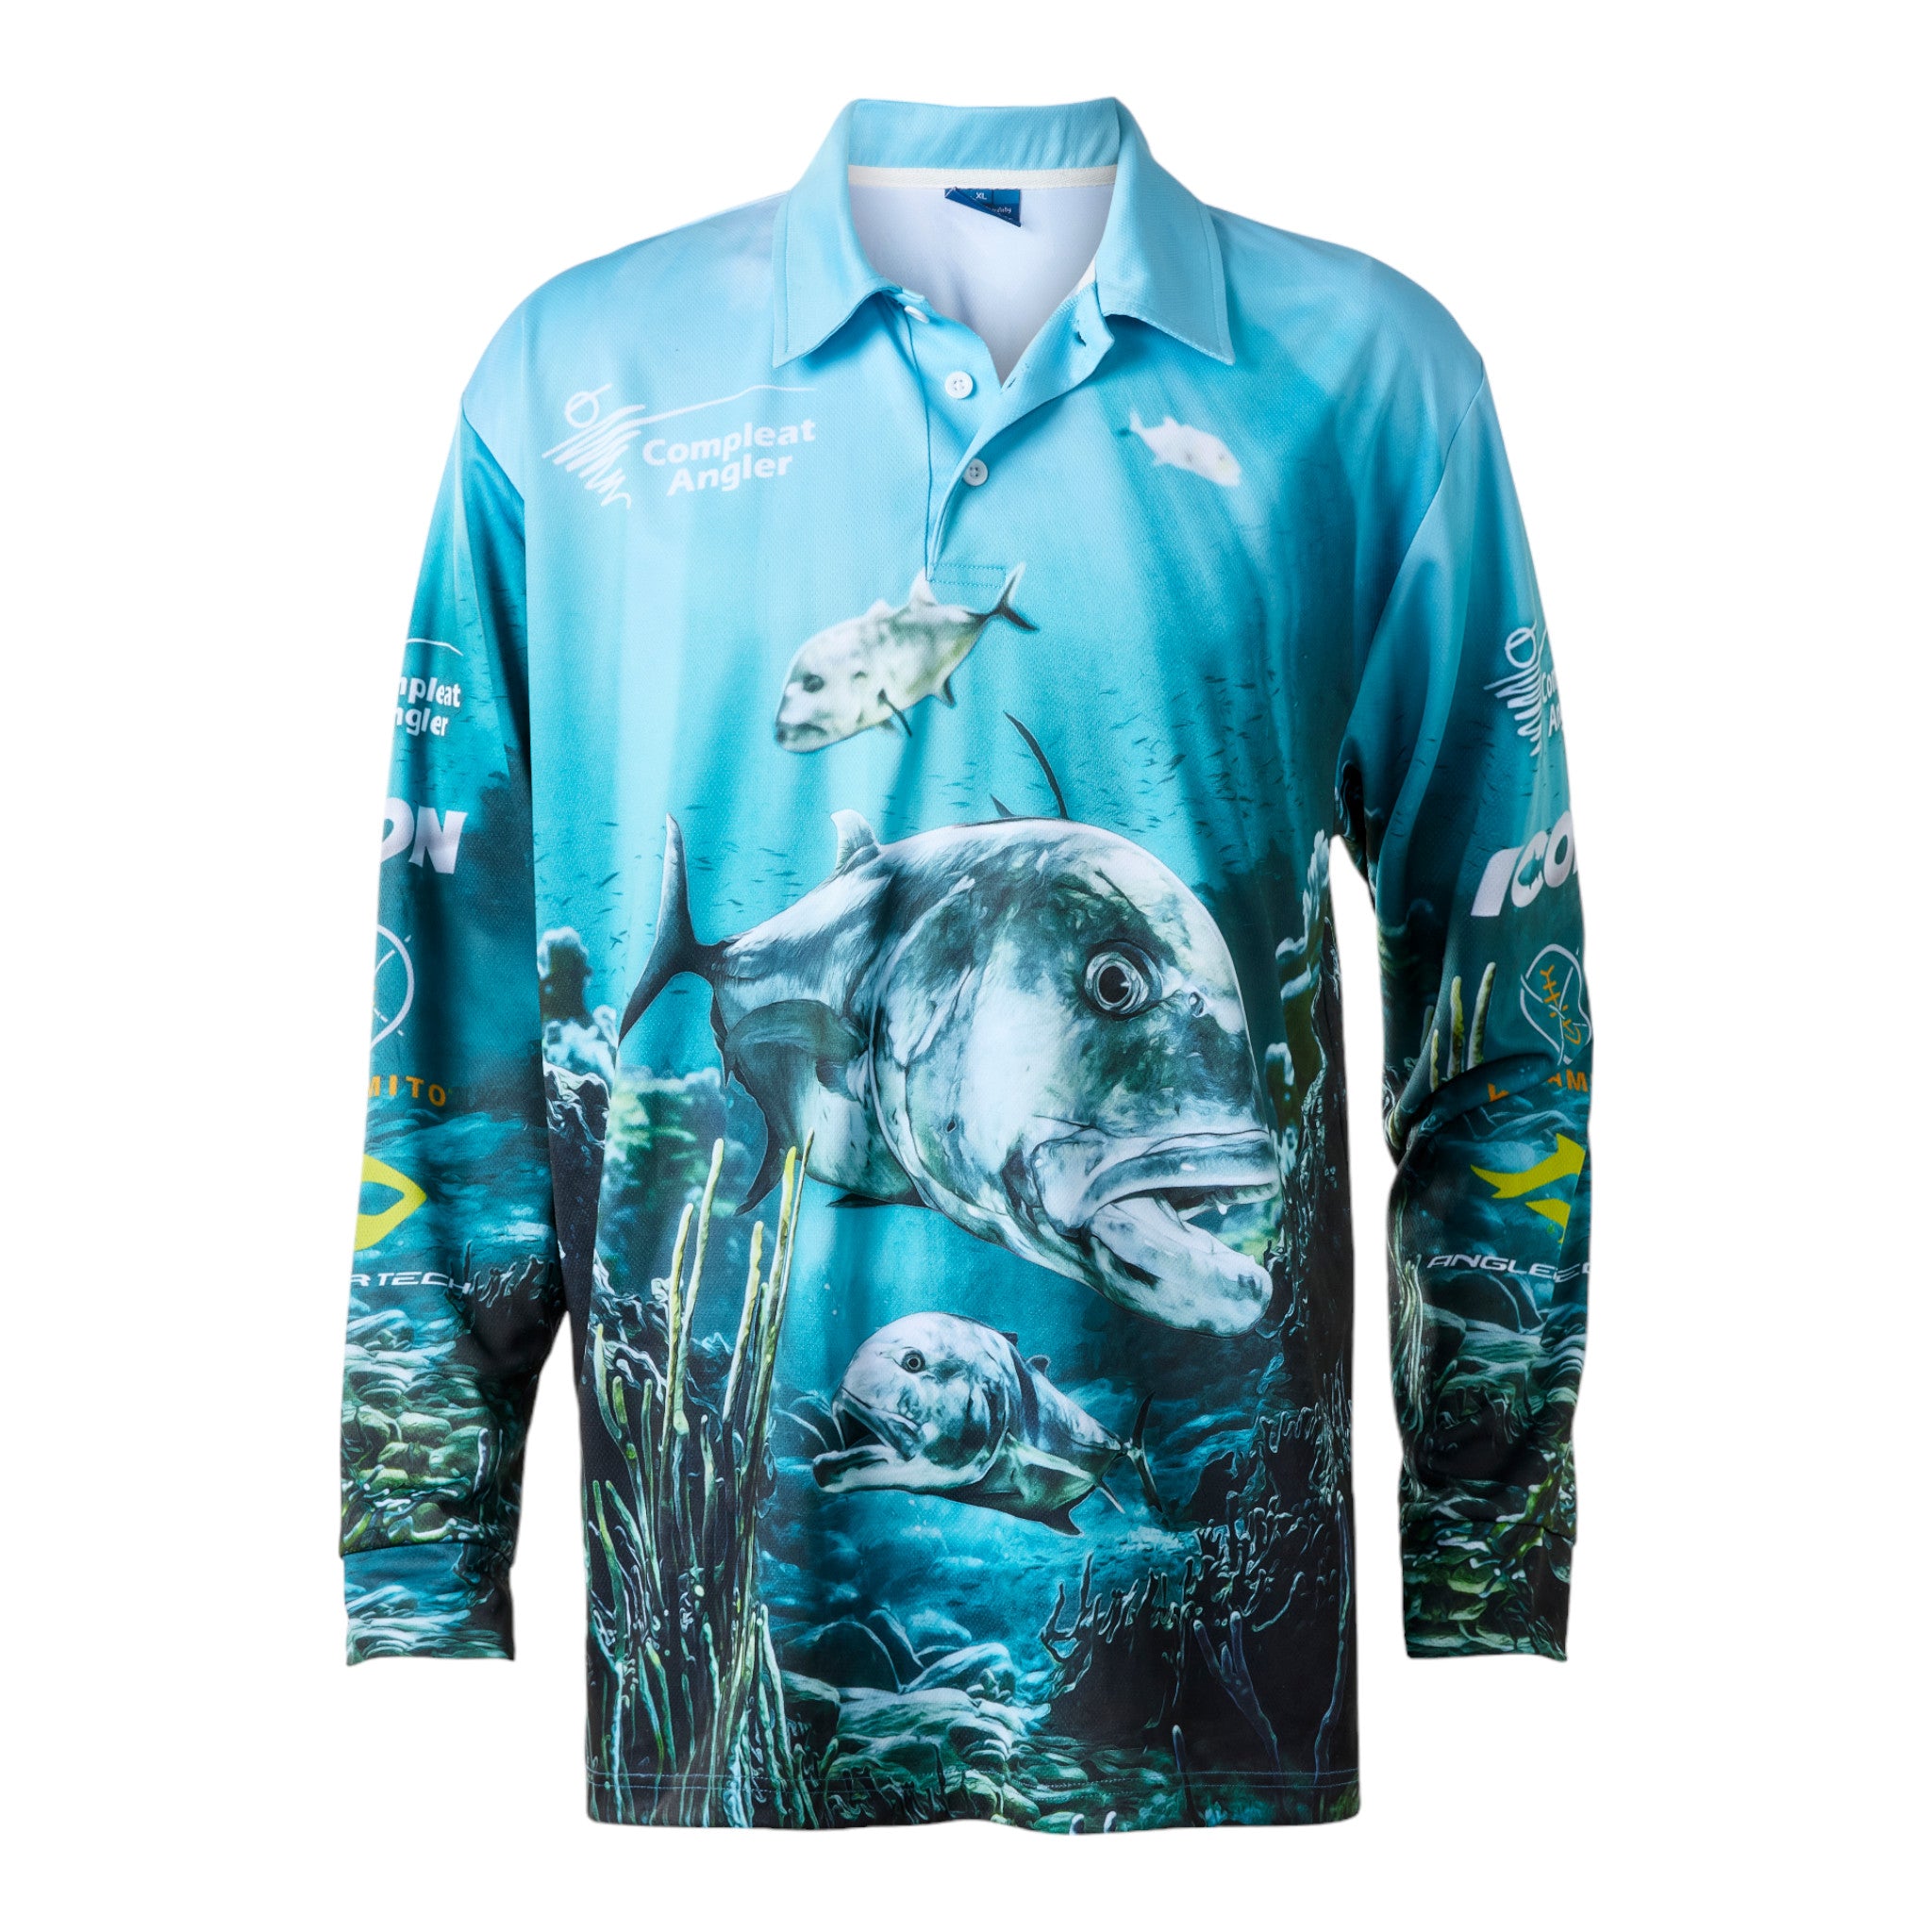 Compleat Angler GT Fishing Shirt